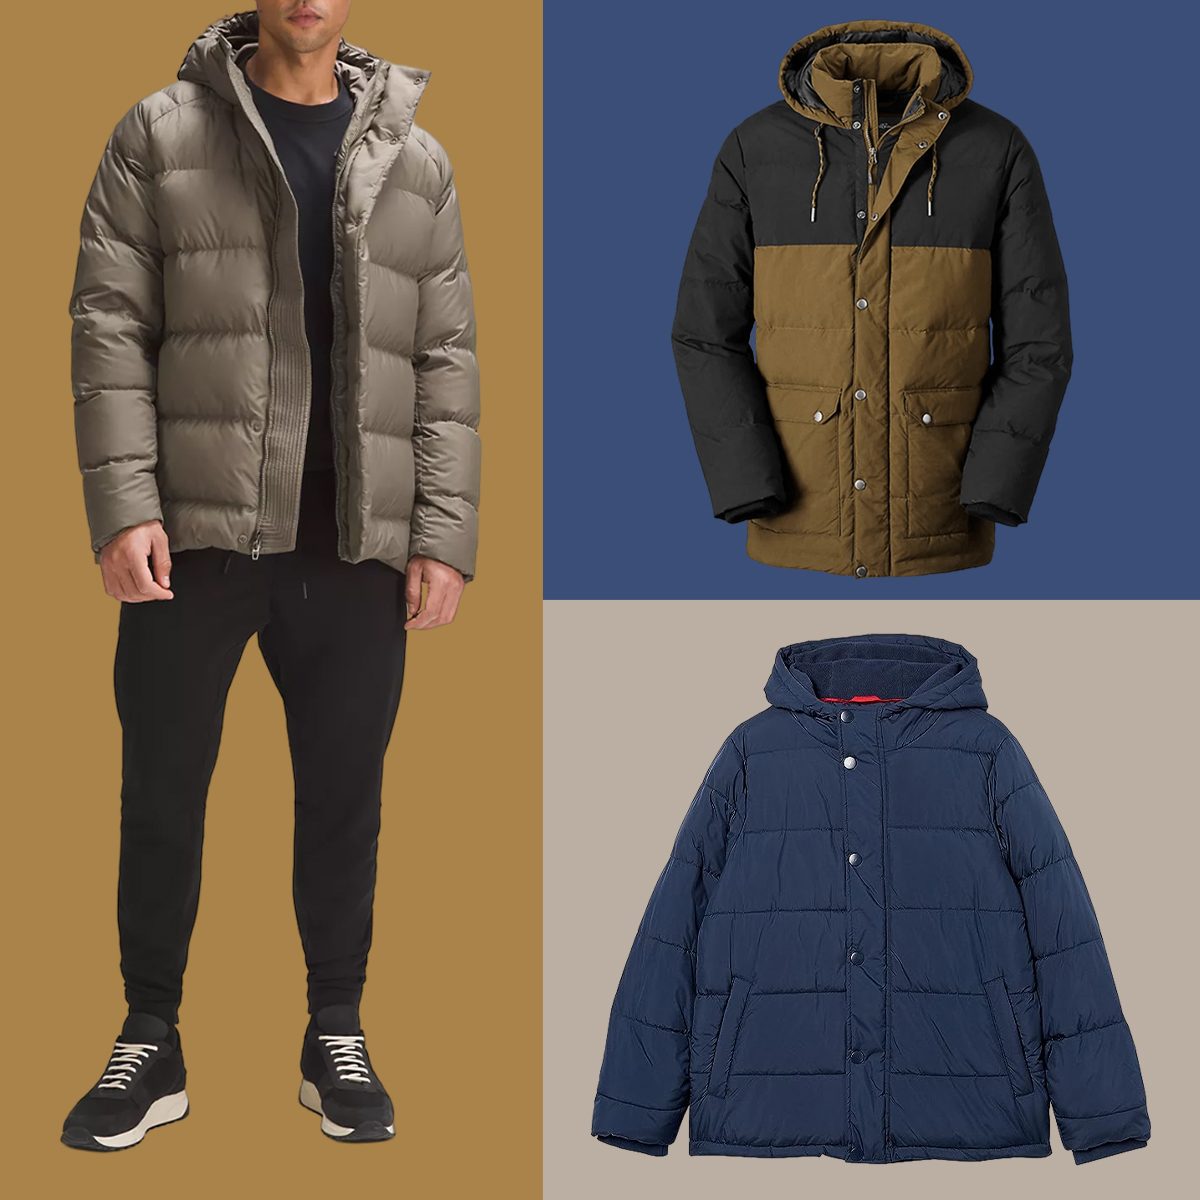 Men's Hooded Jackets: Keep Warm & Covered in a Men's Hooded Coat